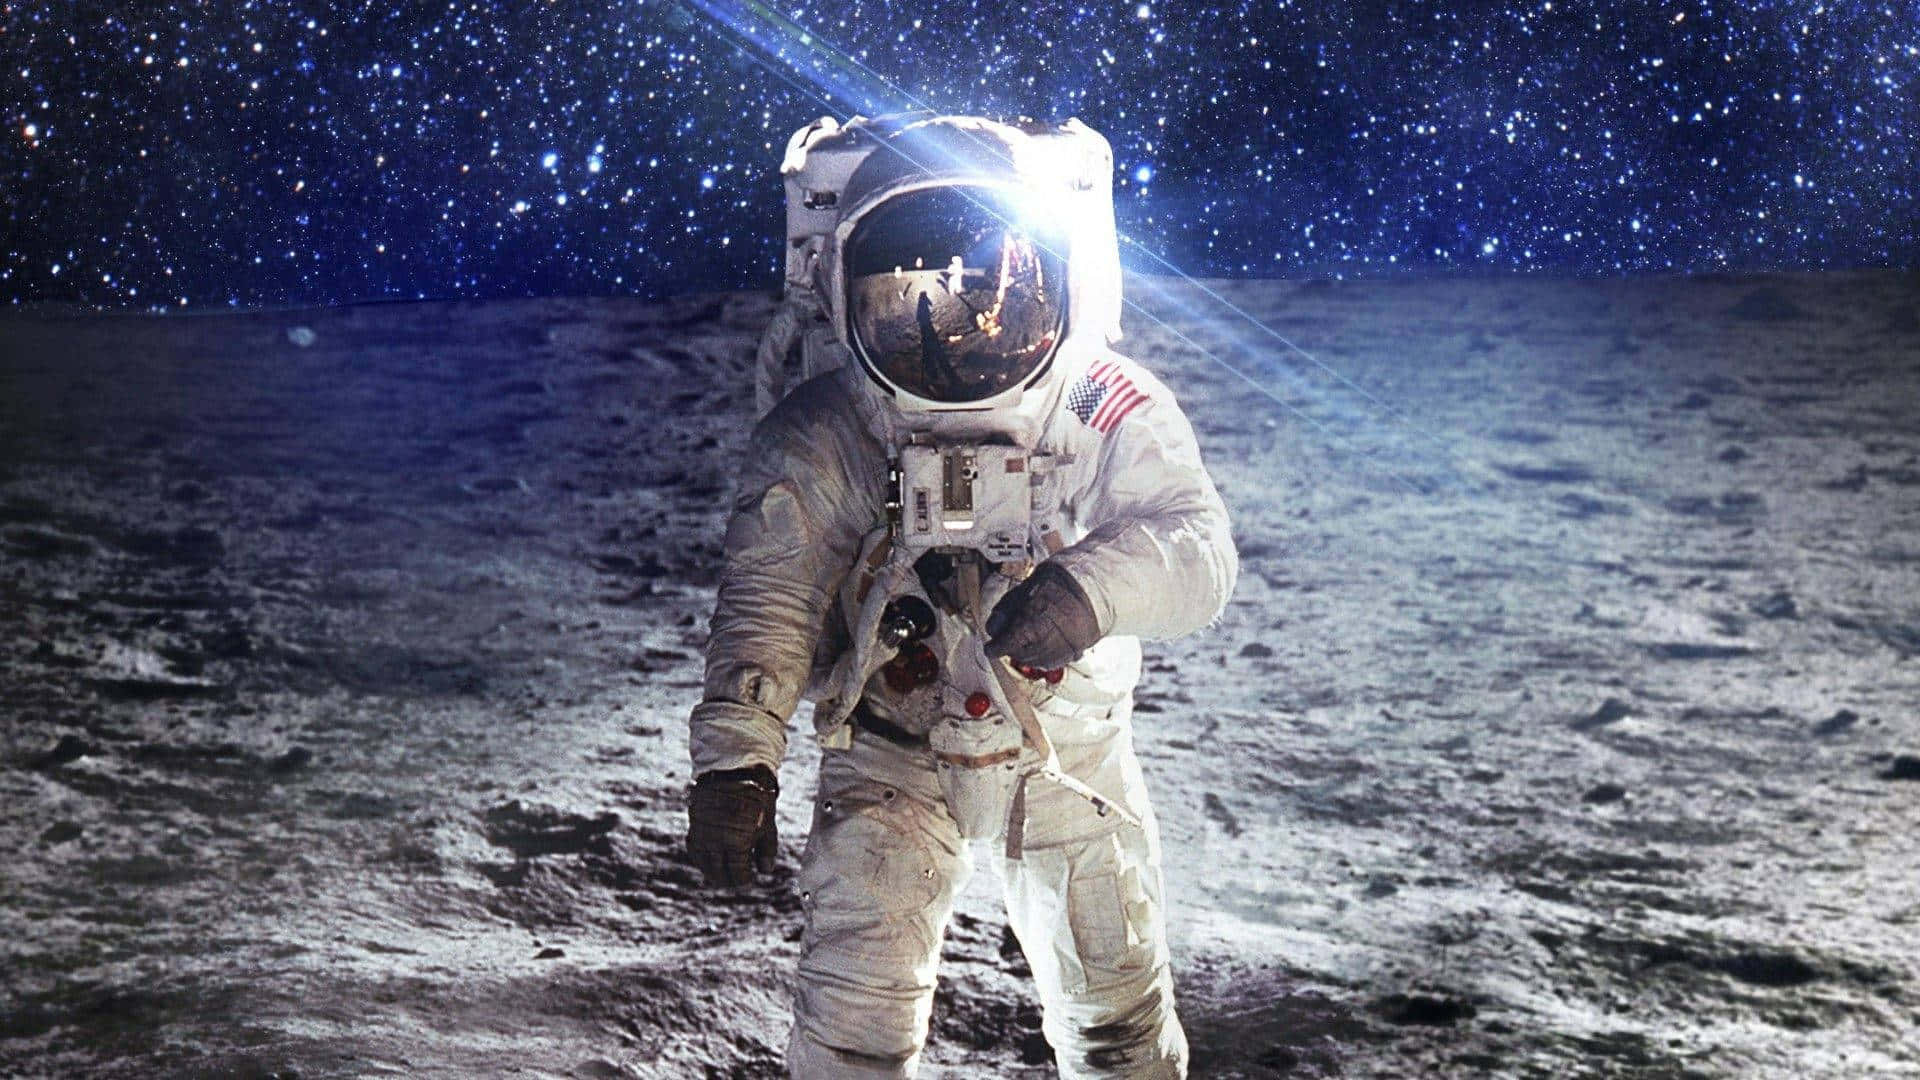 "Dream of the Impossible- An Amazing Astronaut in Outer Space" Wallpaper